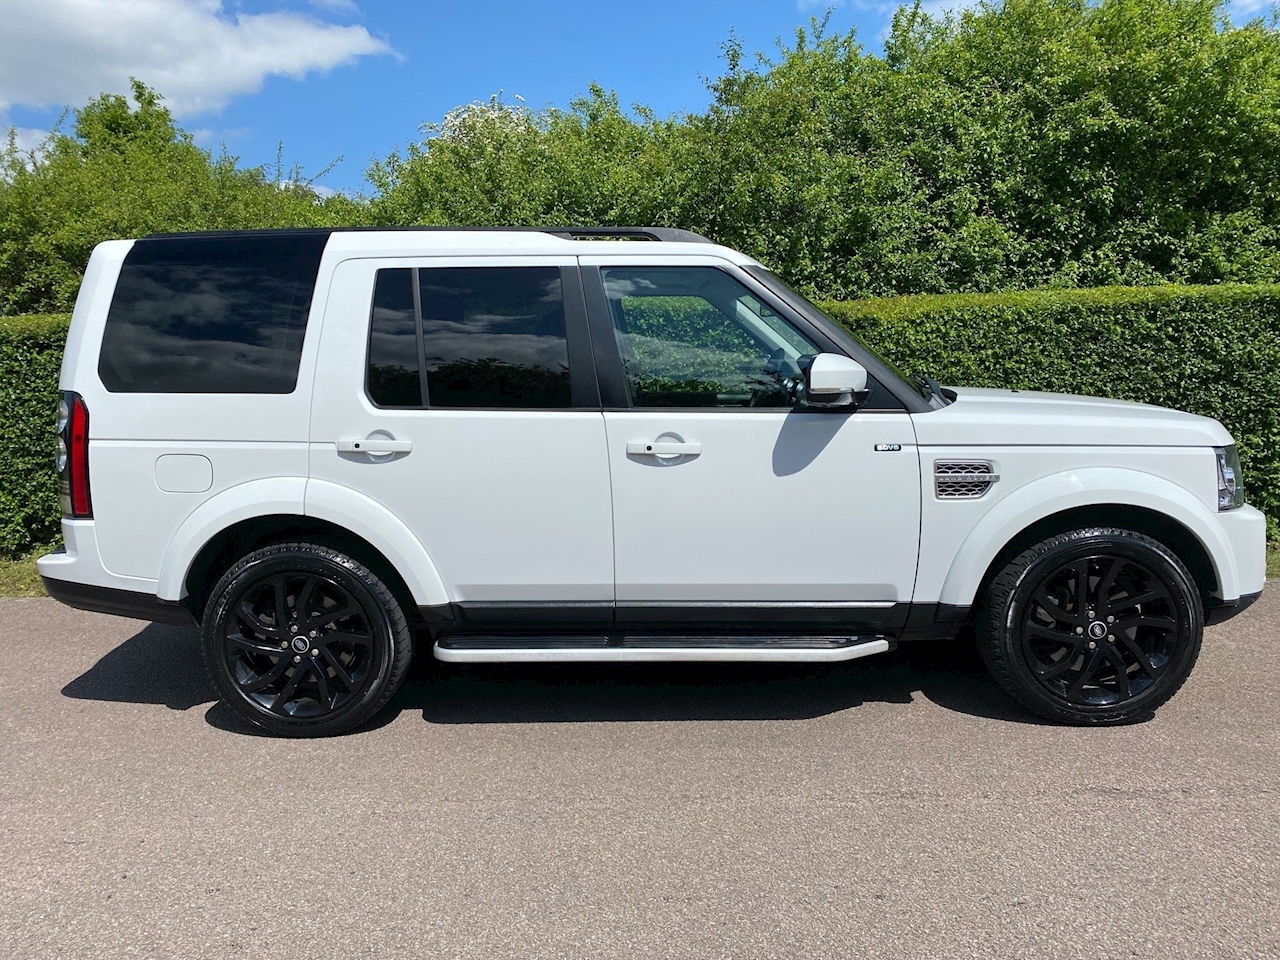 Discovery 4 3.0 SD V6 HSE Luxury Auto 4WD Euro 5 (s/s) 5dr